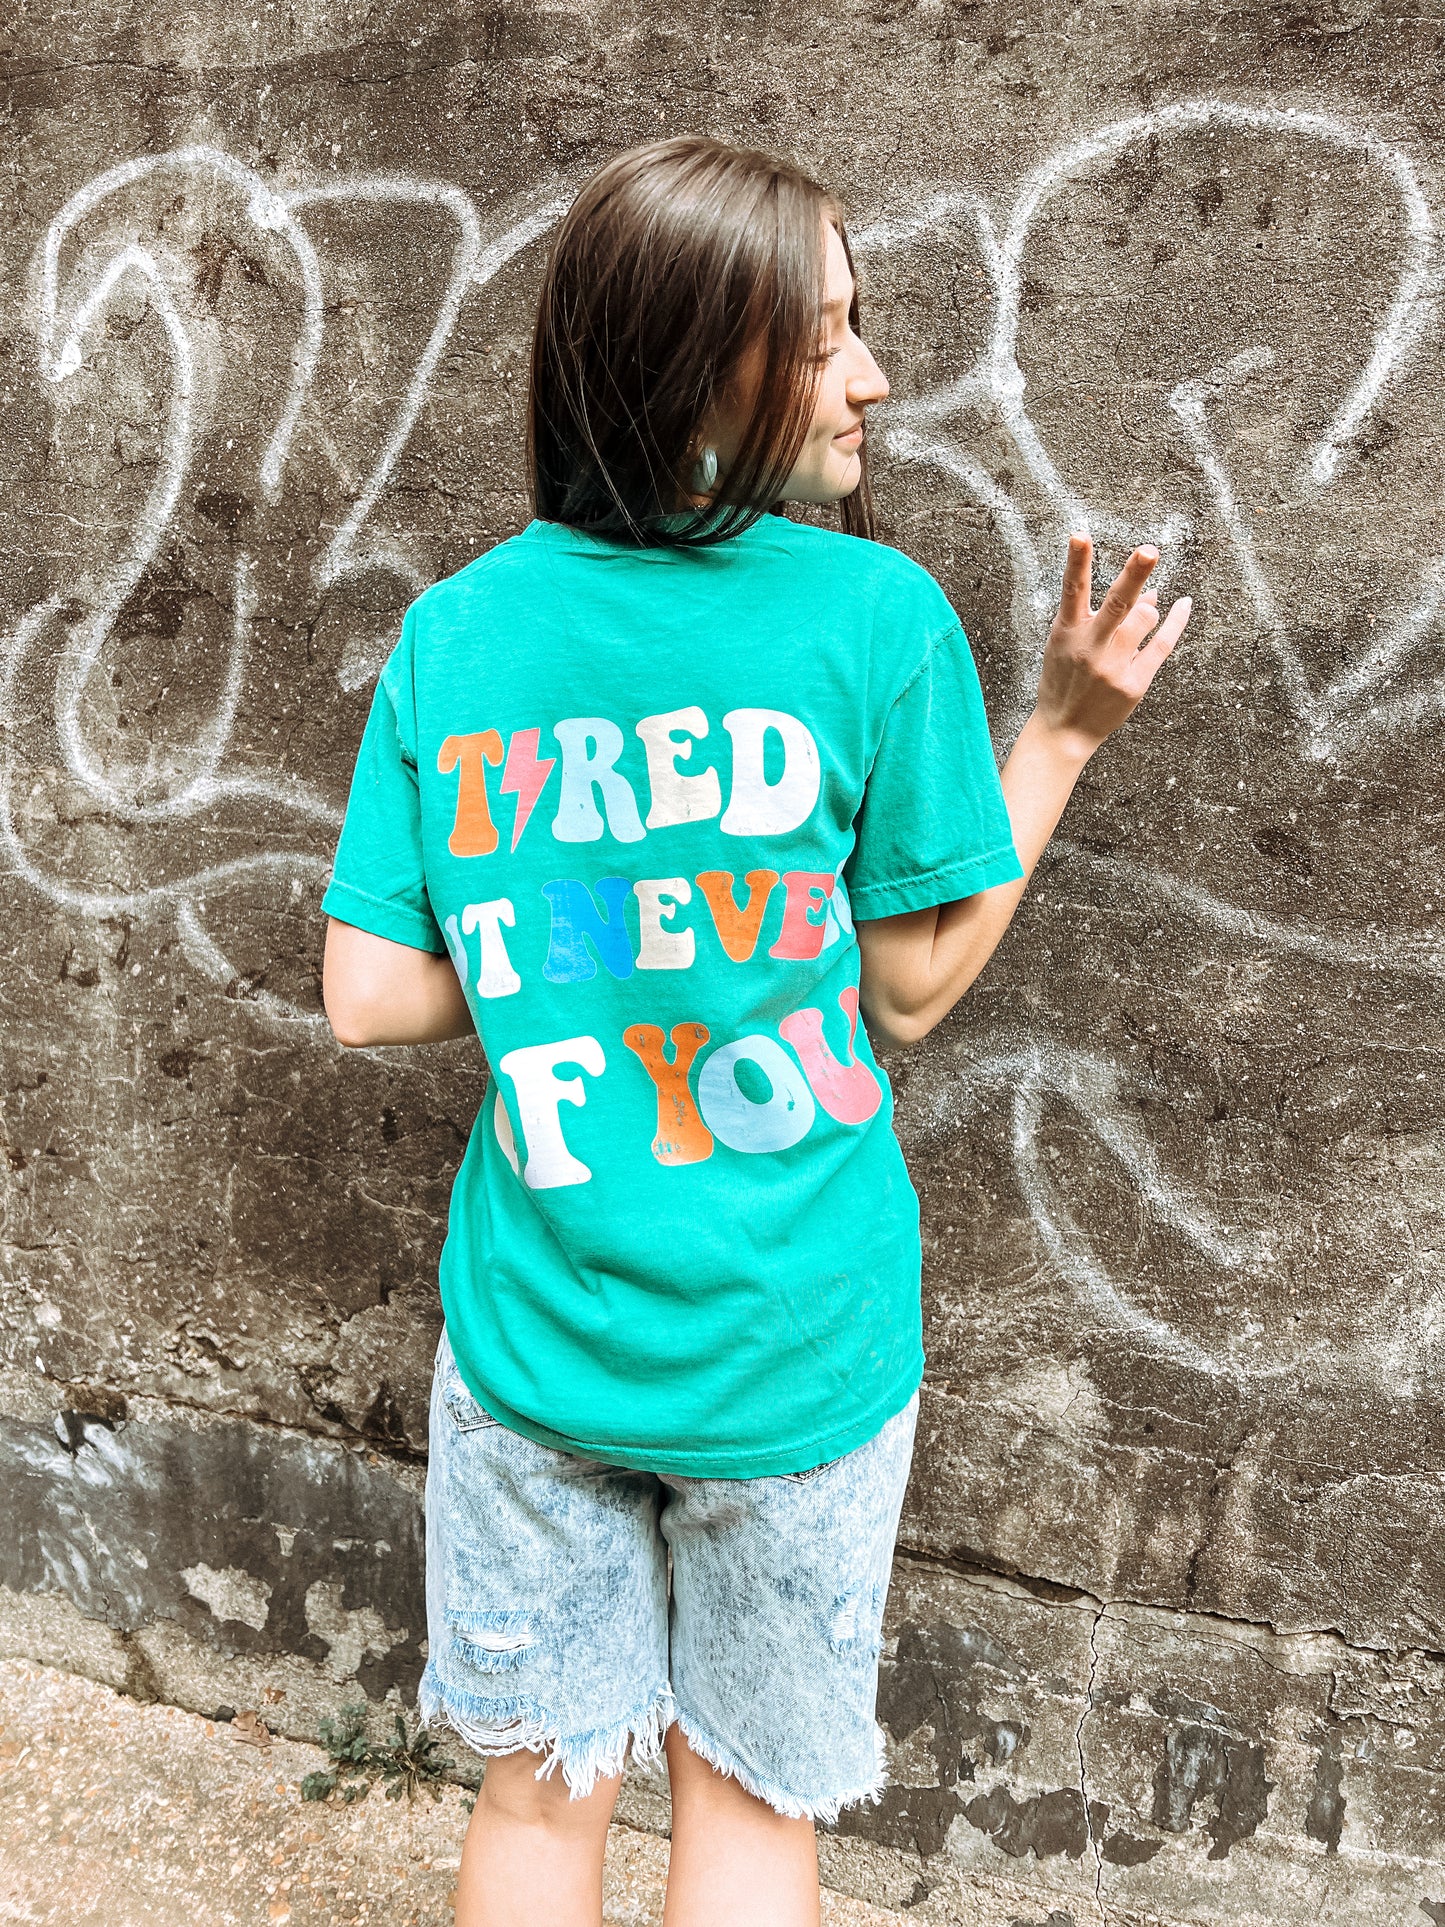 Tired but never of you tee